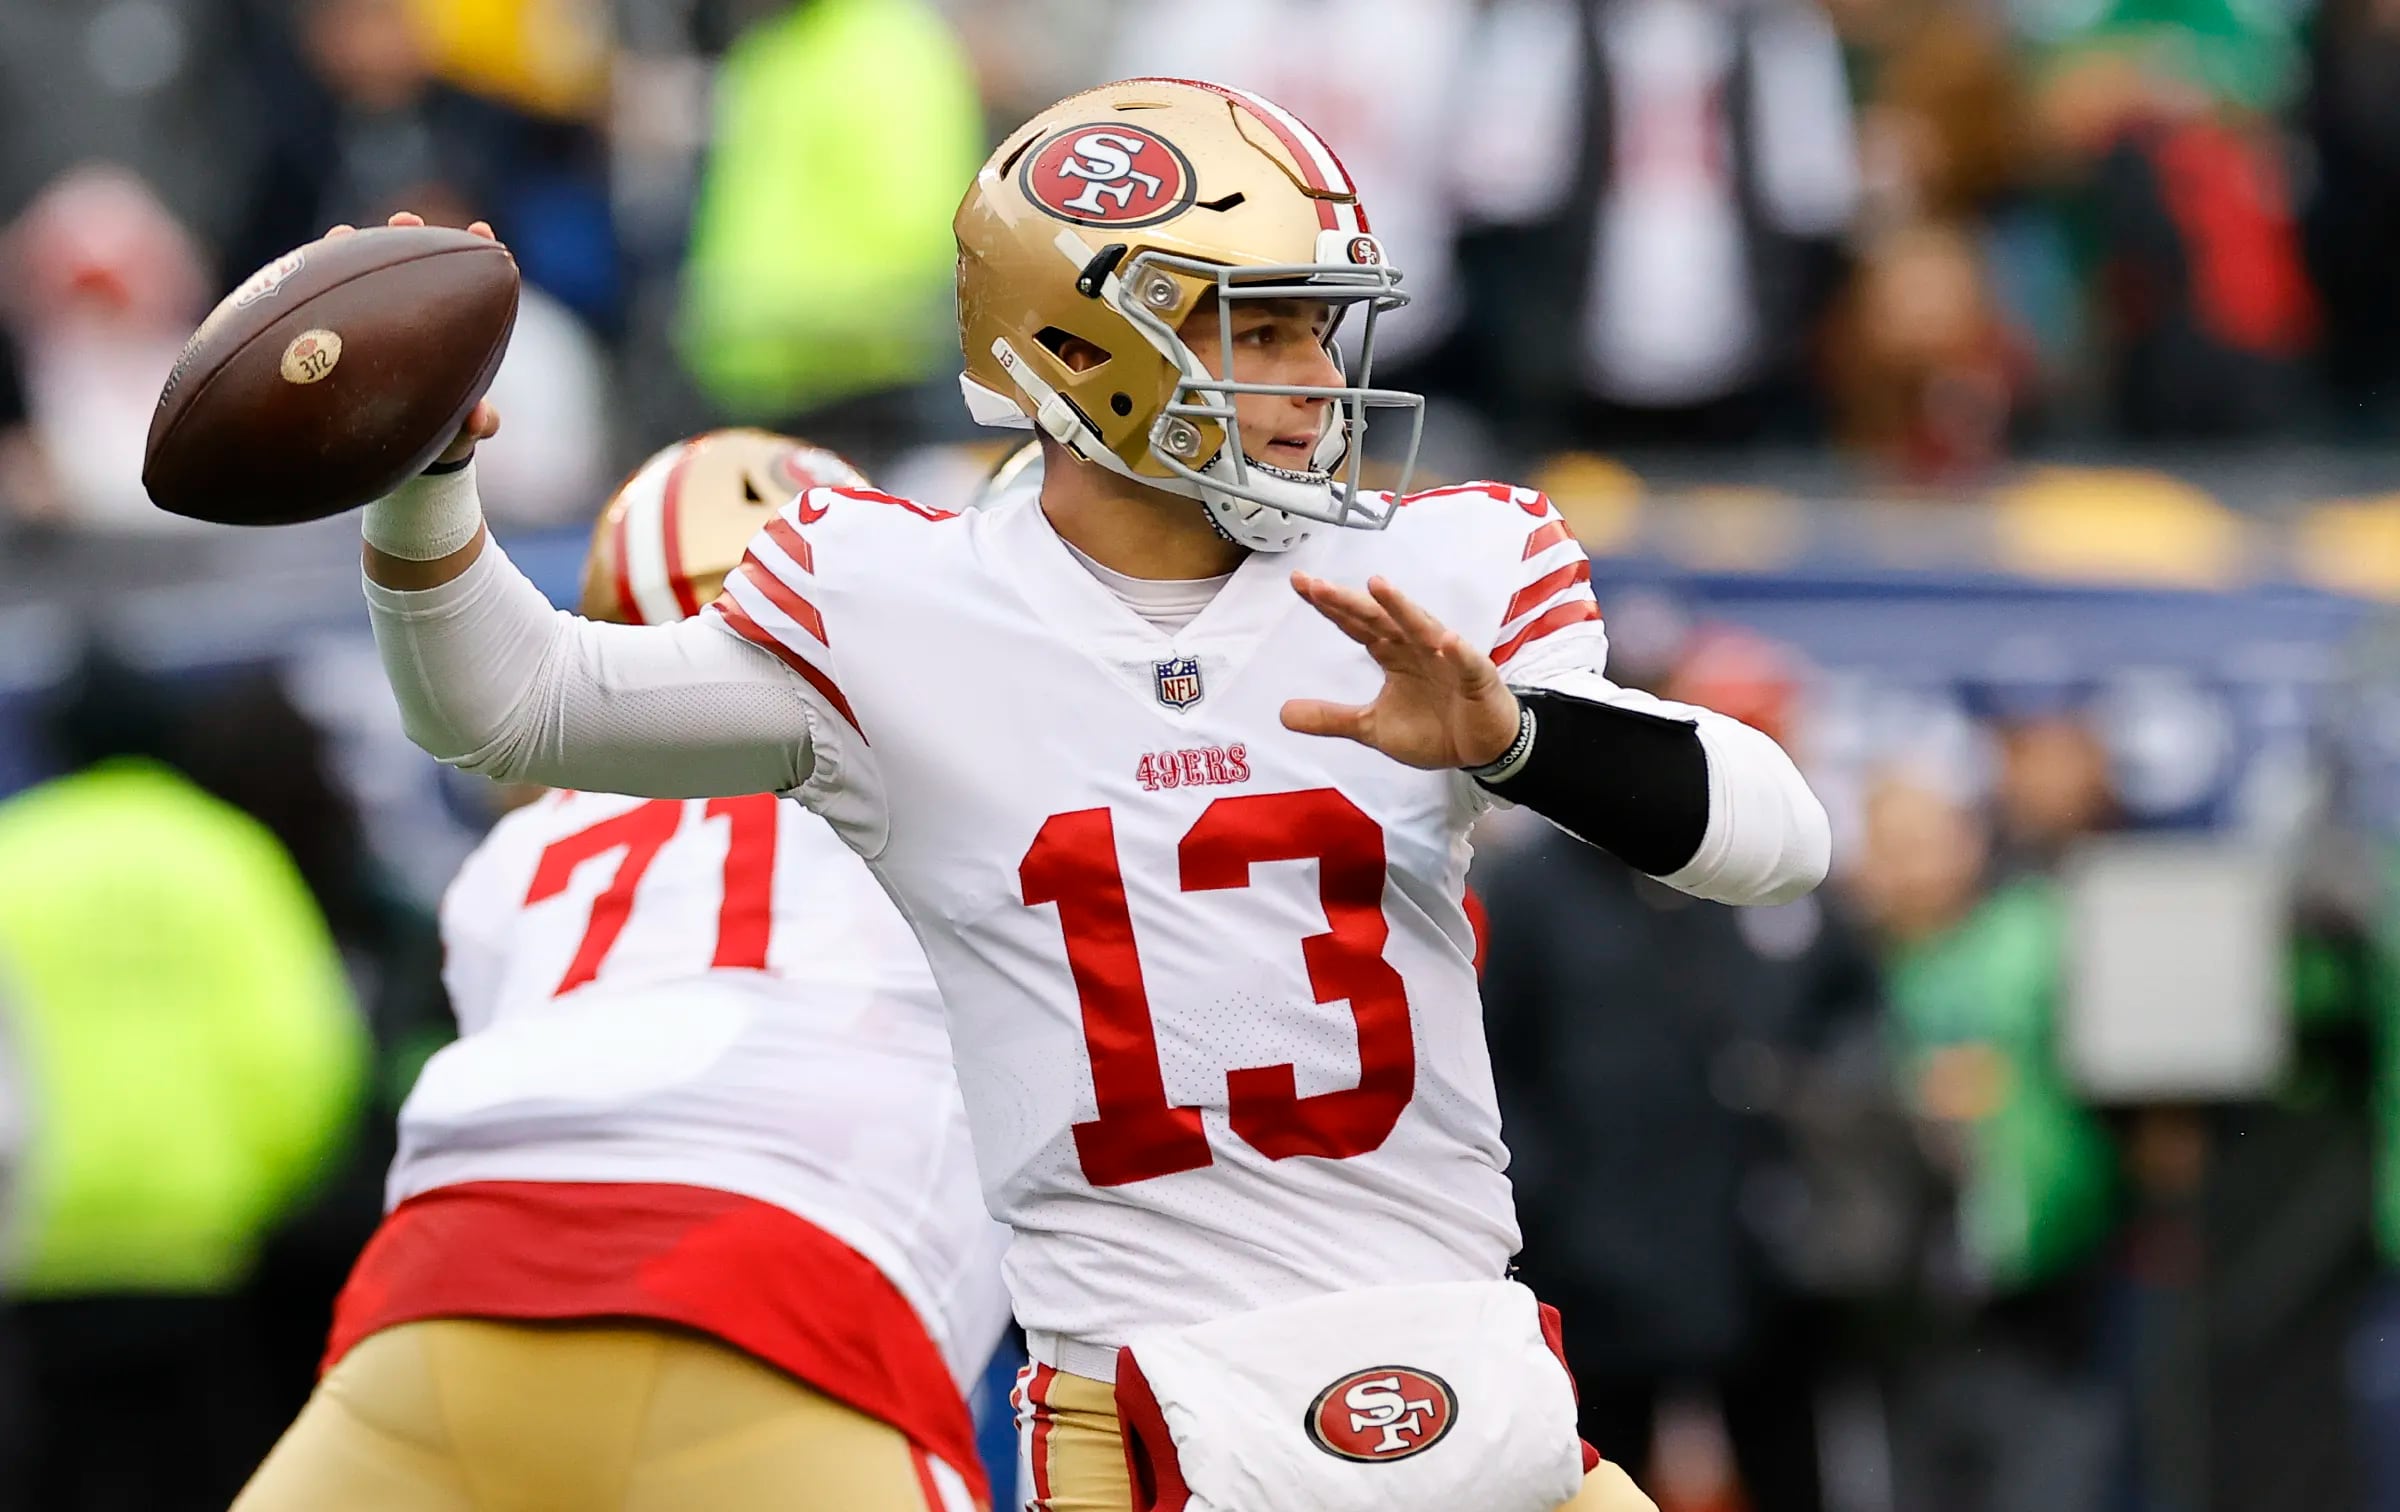 San Francisco 49ers quarterback Brock Purdy throws the football against the Eagles during the NFC Championship game.